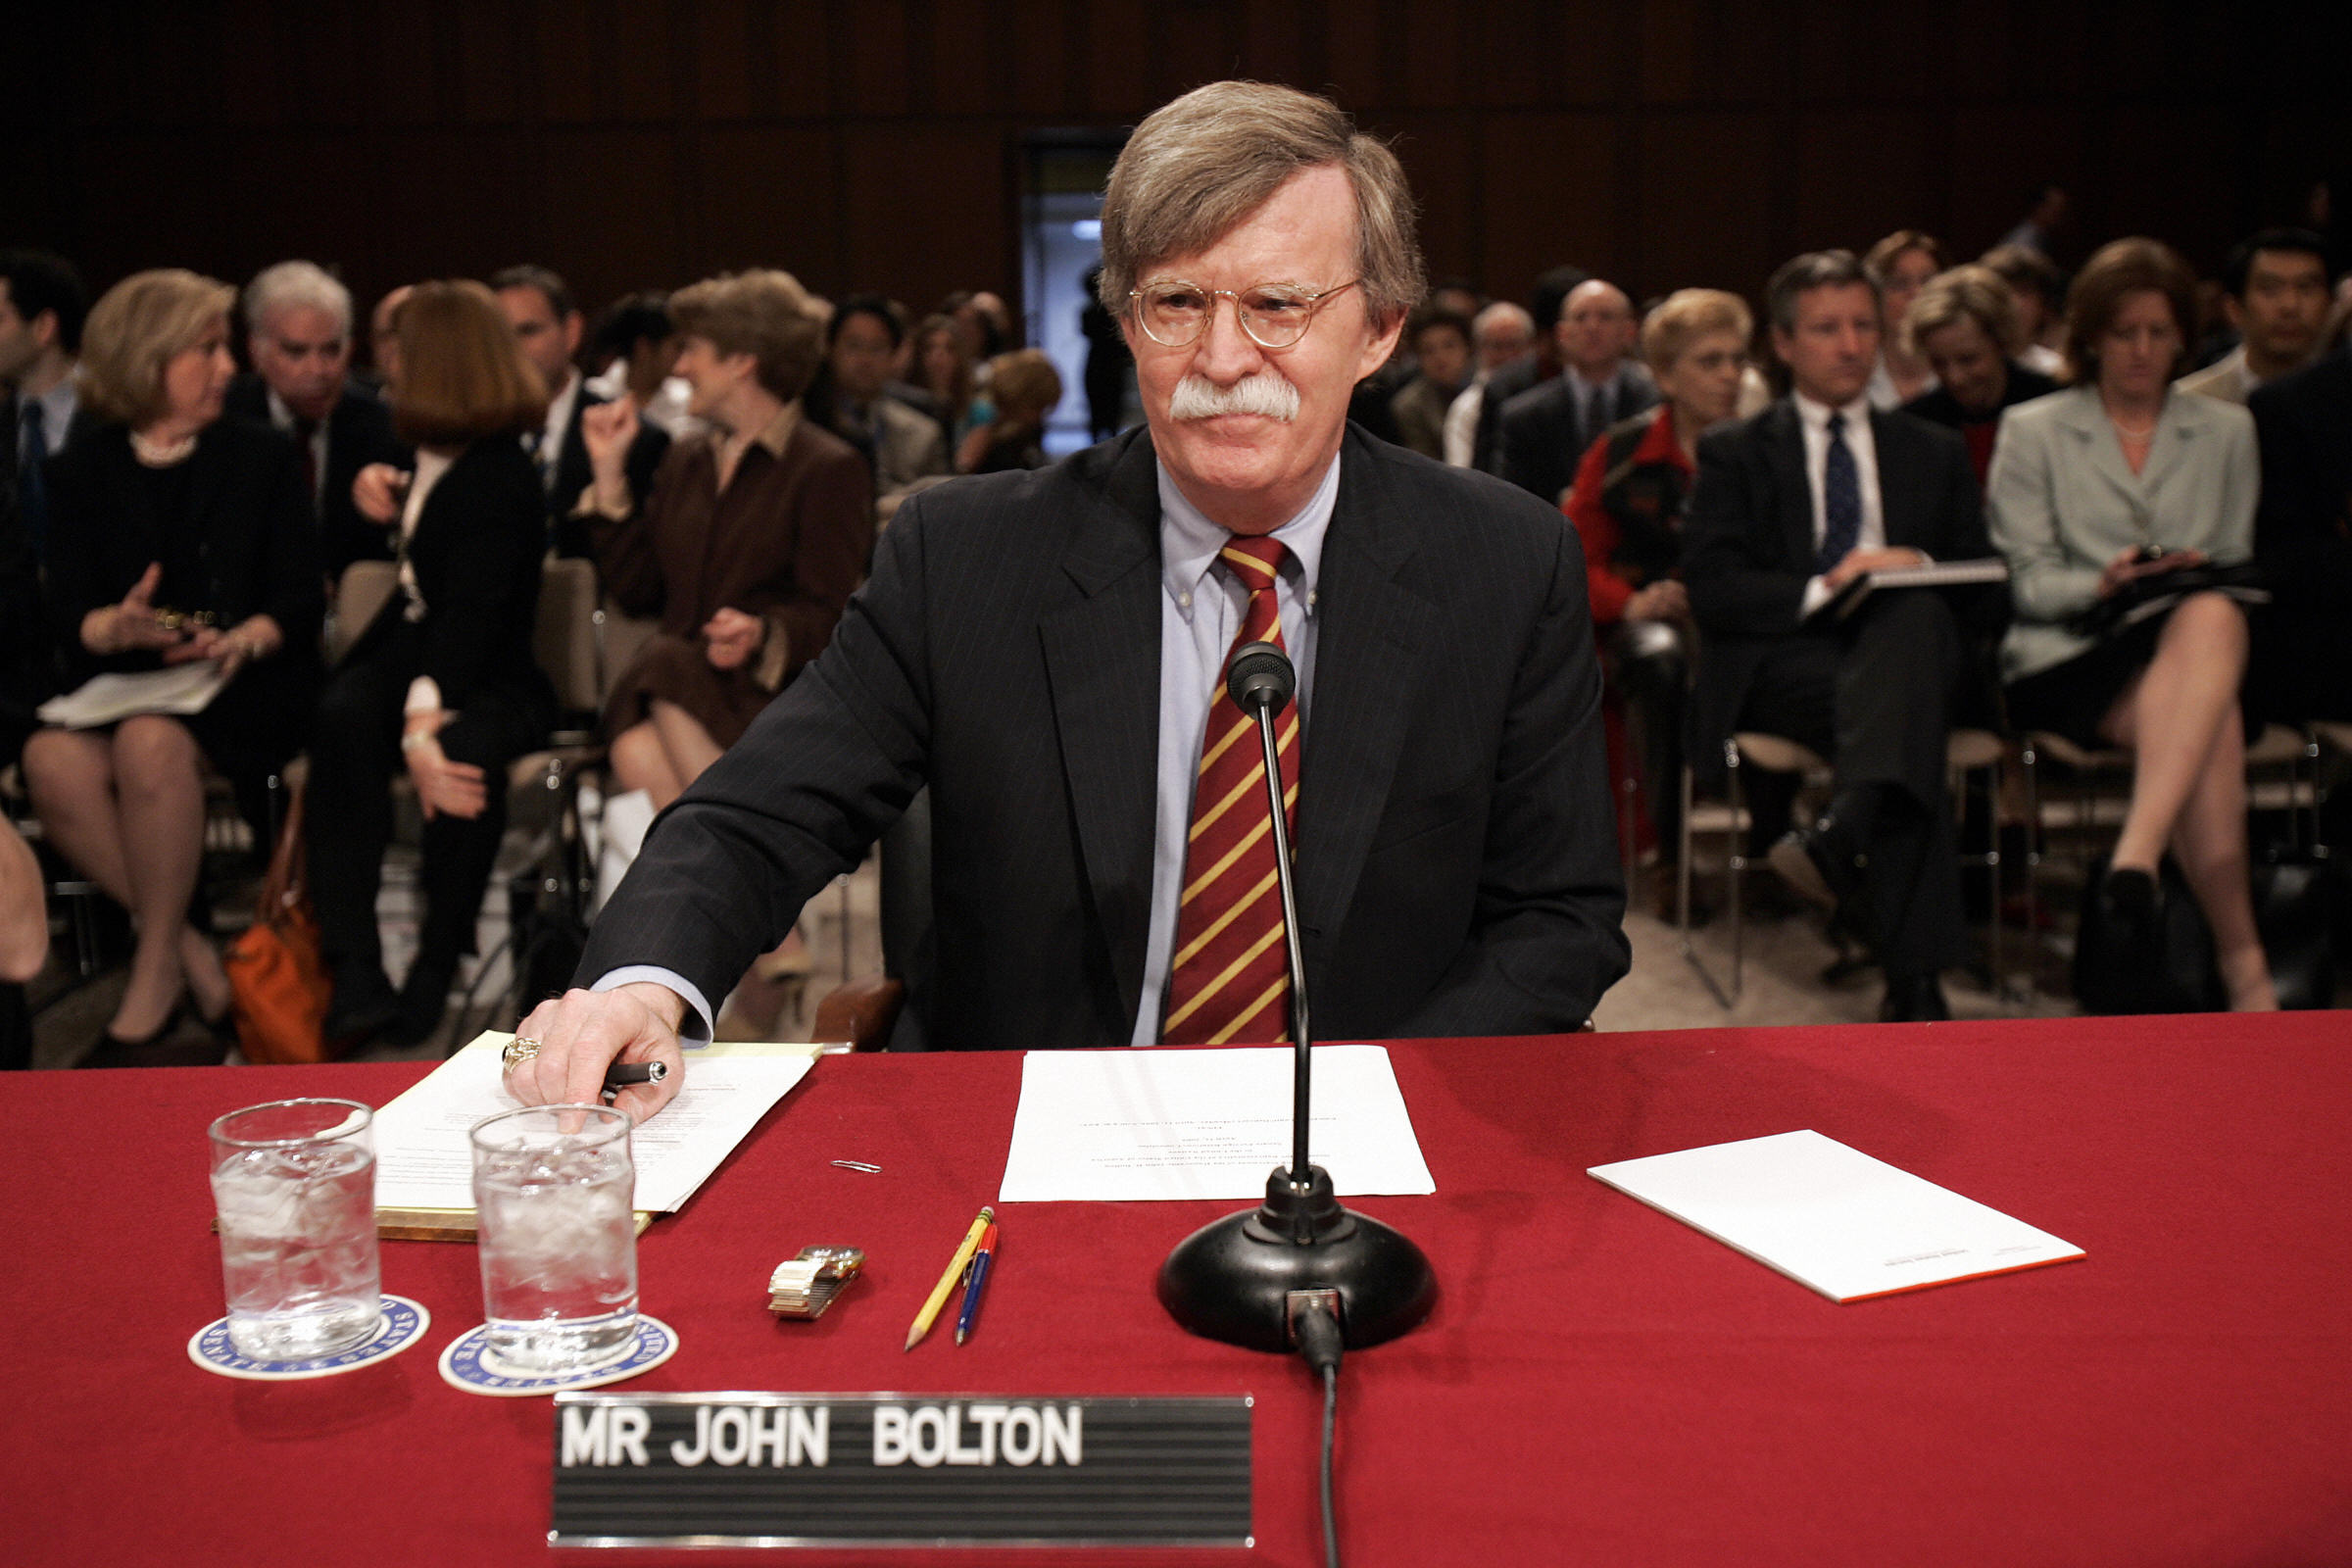 John Bolton takes his seat before a confirmation hearing of the Senate Foreign Relations Committee on Capitol Hill April 11, 2005 in Washington  for his nomination as US ambassador to the United Nations. (BRENDAN SMIALOWSKI&mdash;AFP/Getty Images)